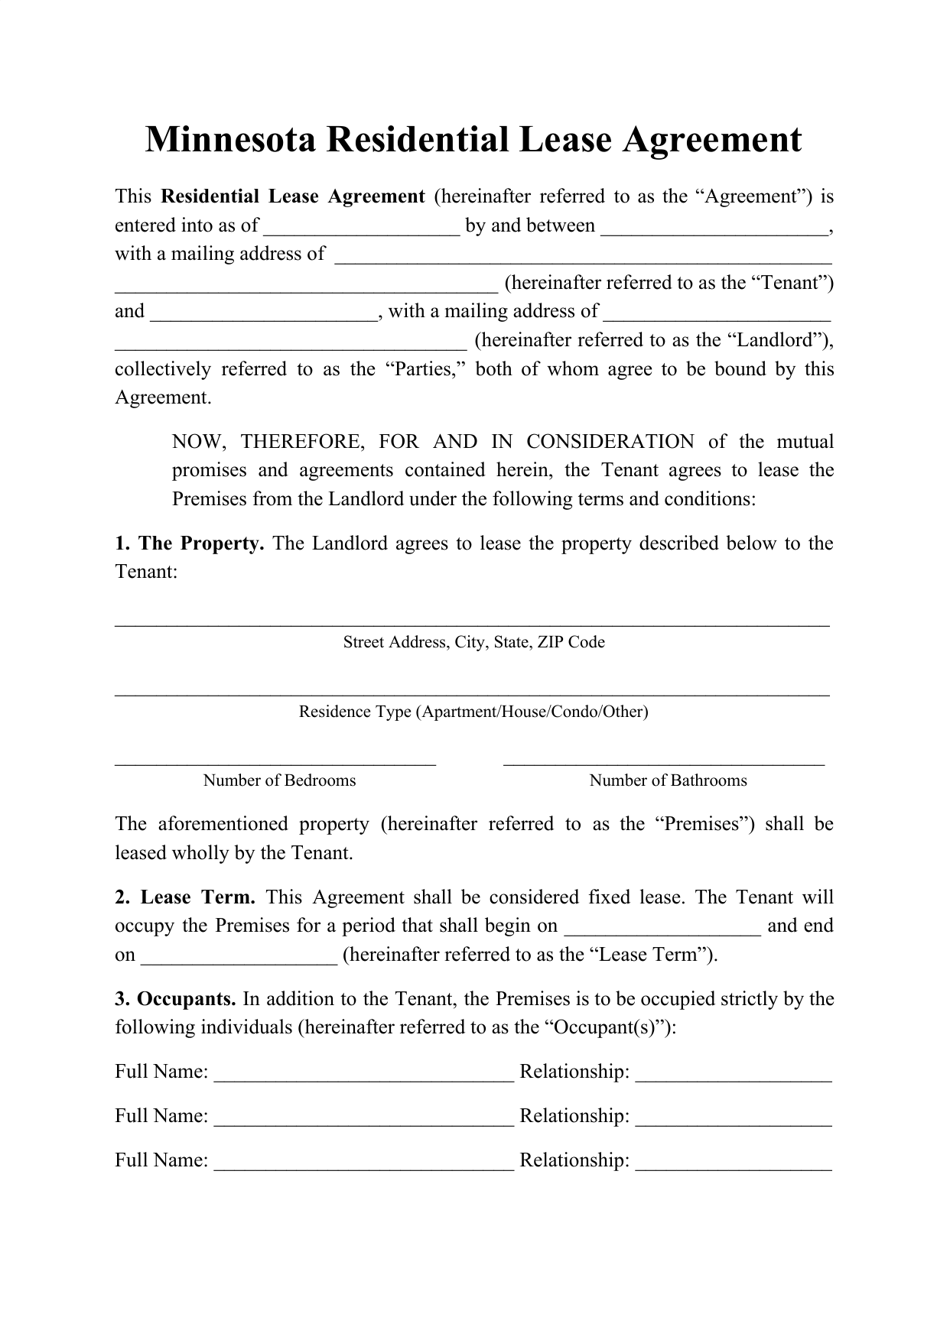 minnesota-residential-lease-agreement-template-download-printable-pdf-templateroller